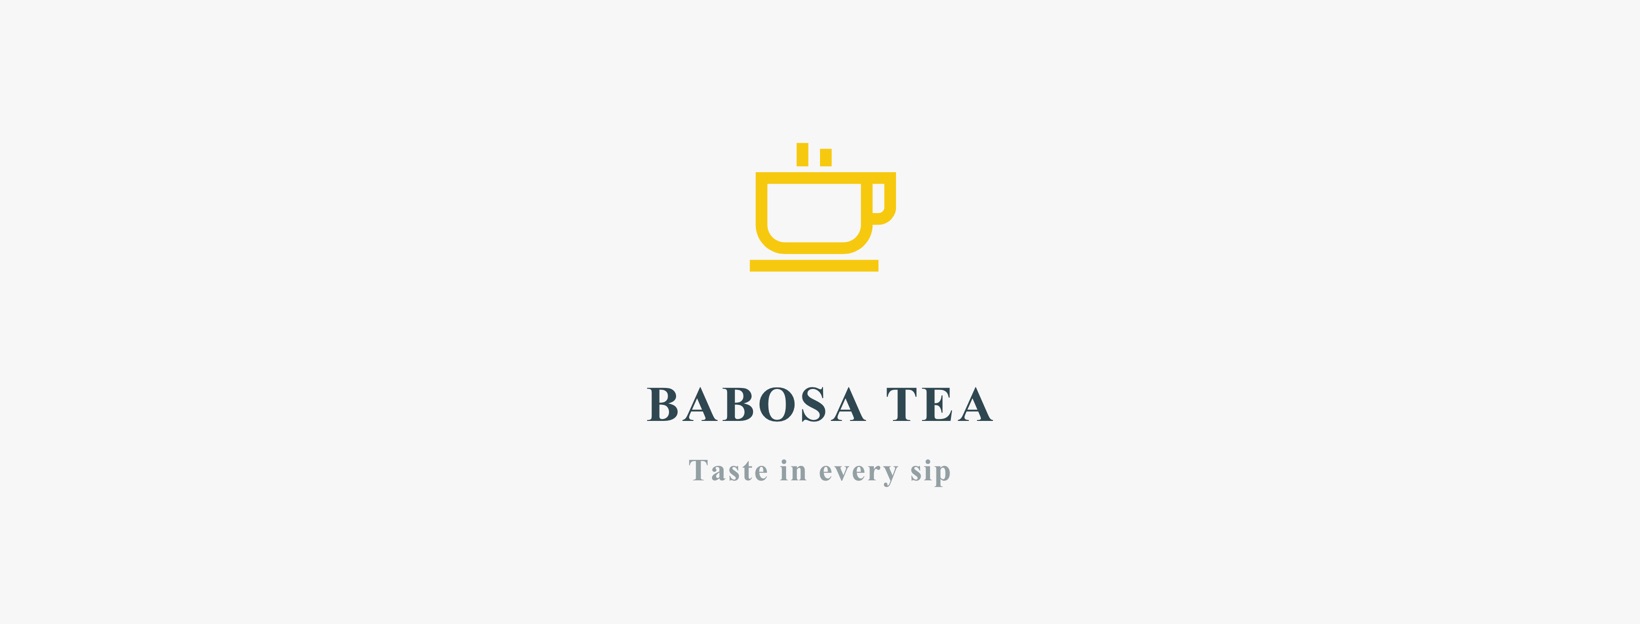 Wanted-Distributors/Wholesalers/Traders for Tea Products in Delhi, India